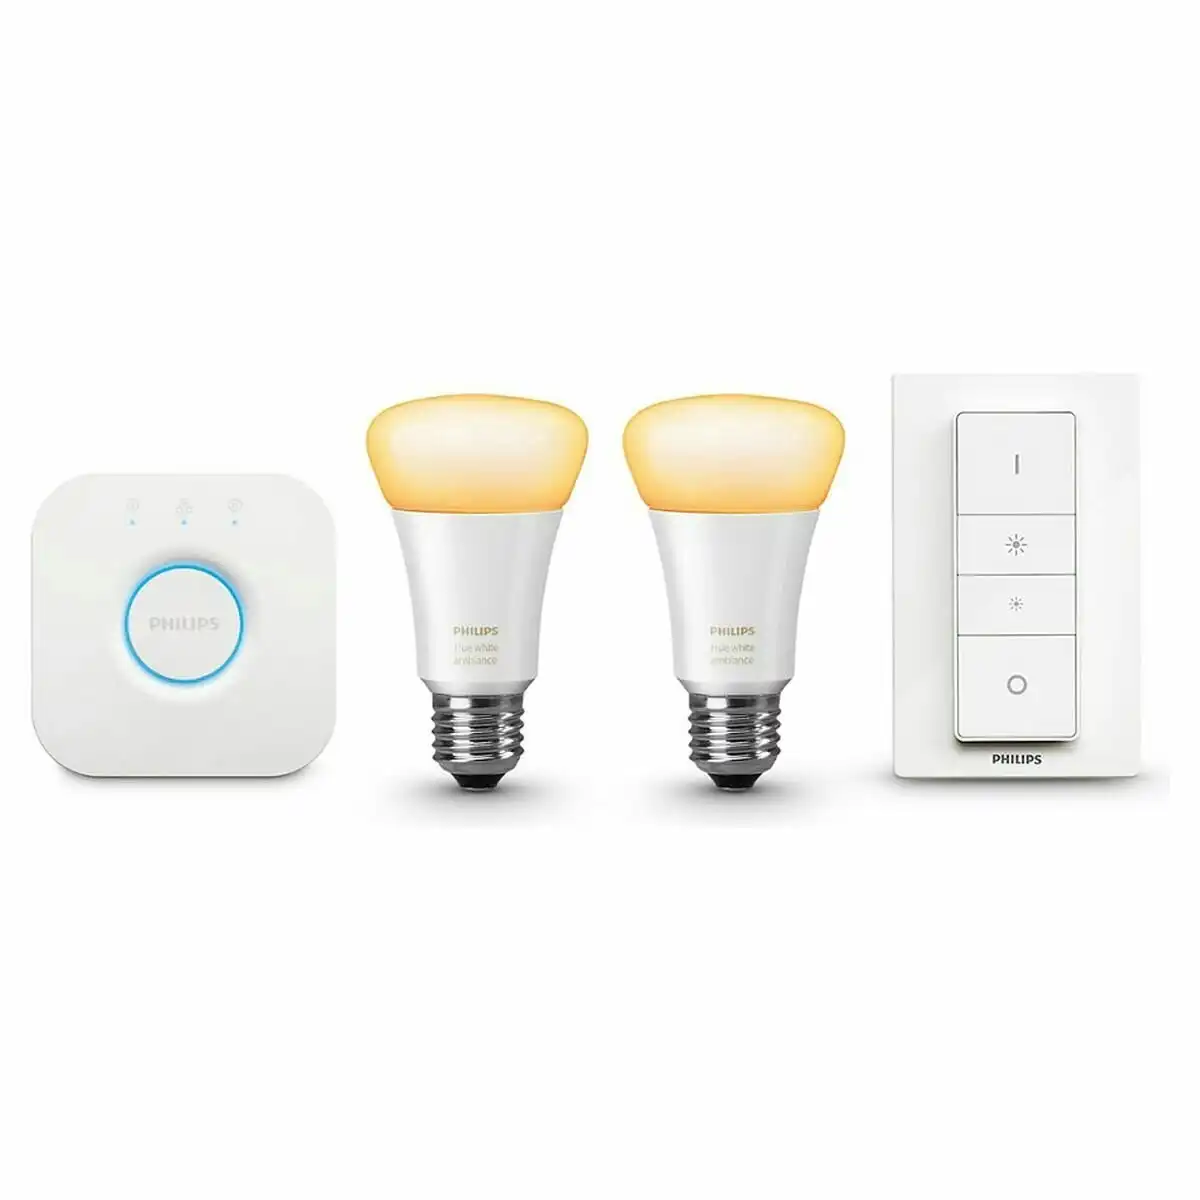 Philips Hue Ambiance E27 Starter Kit With Bridge & Dimming Switch -